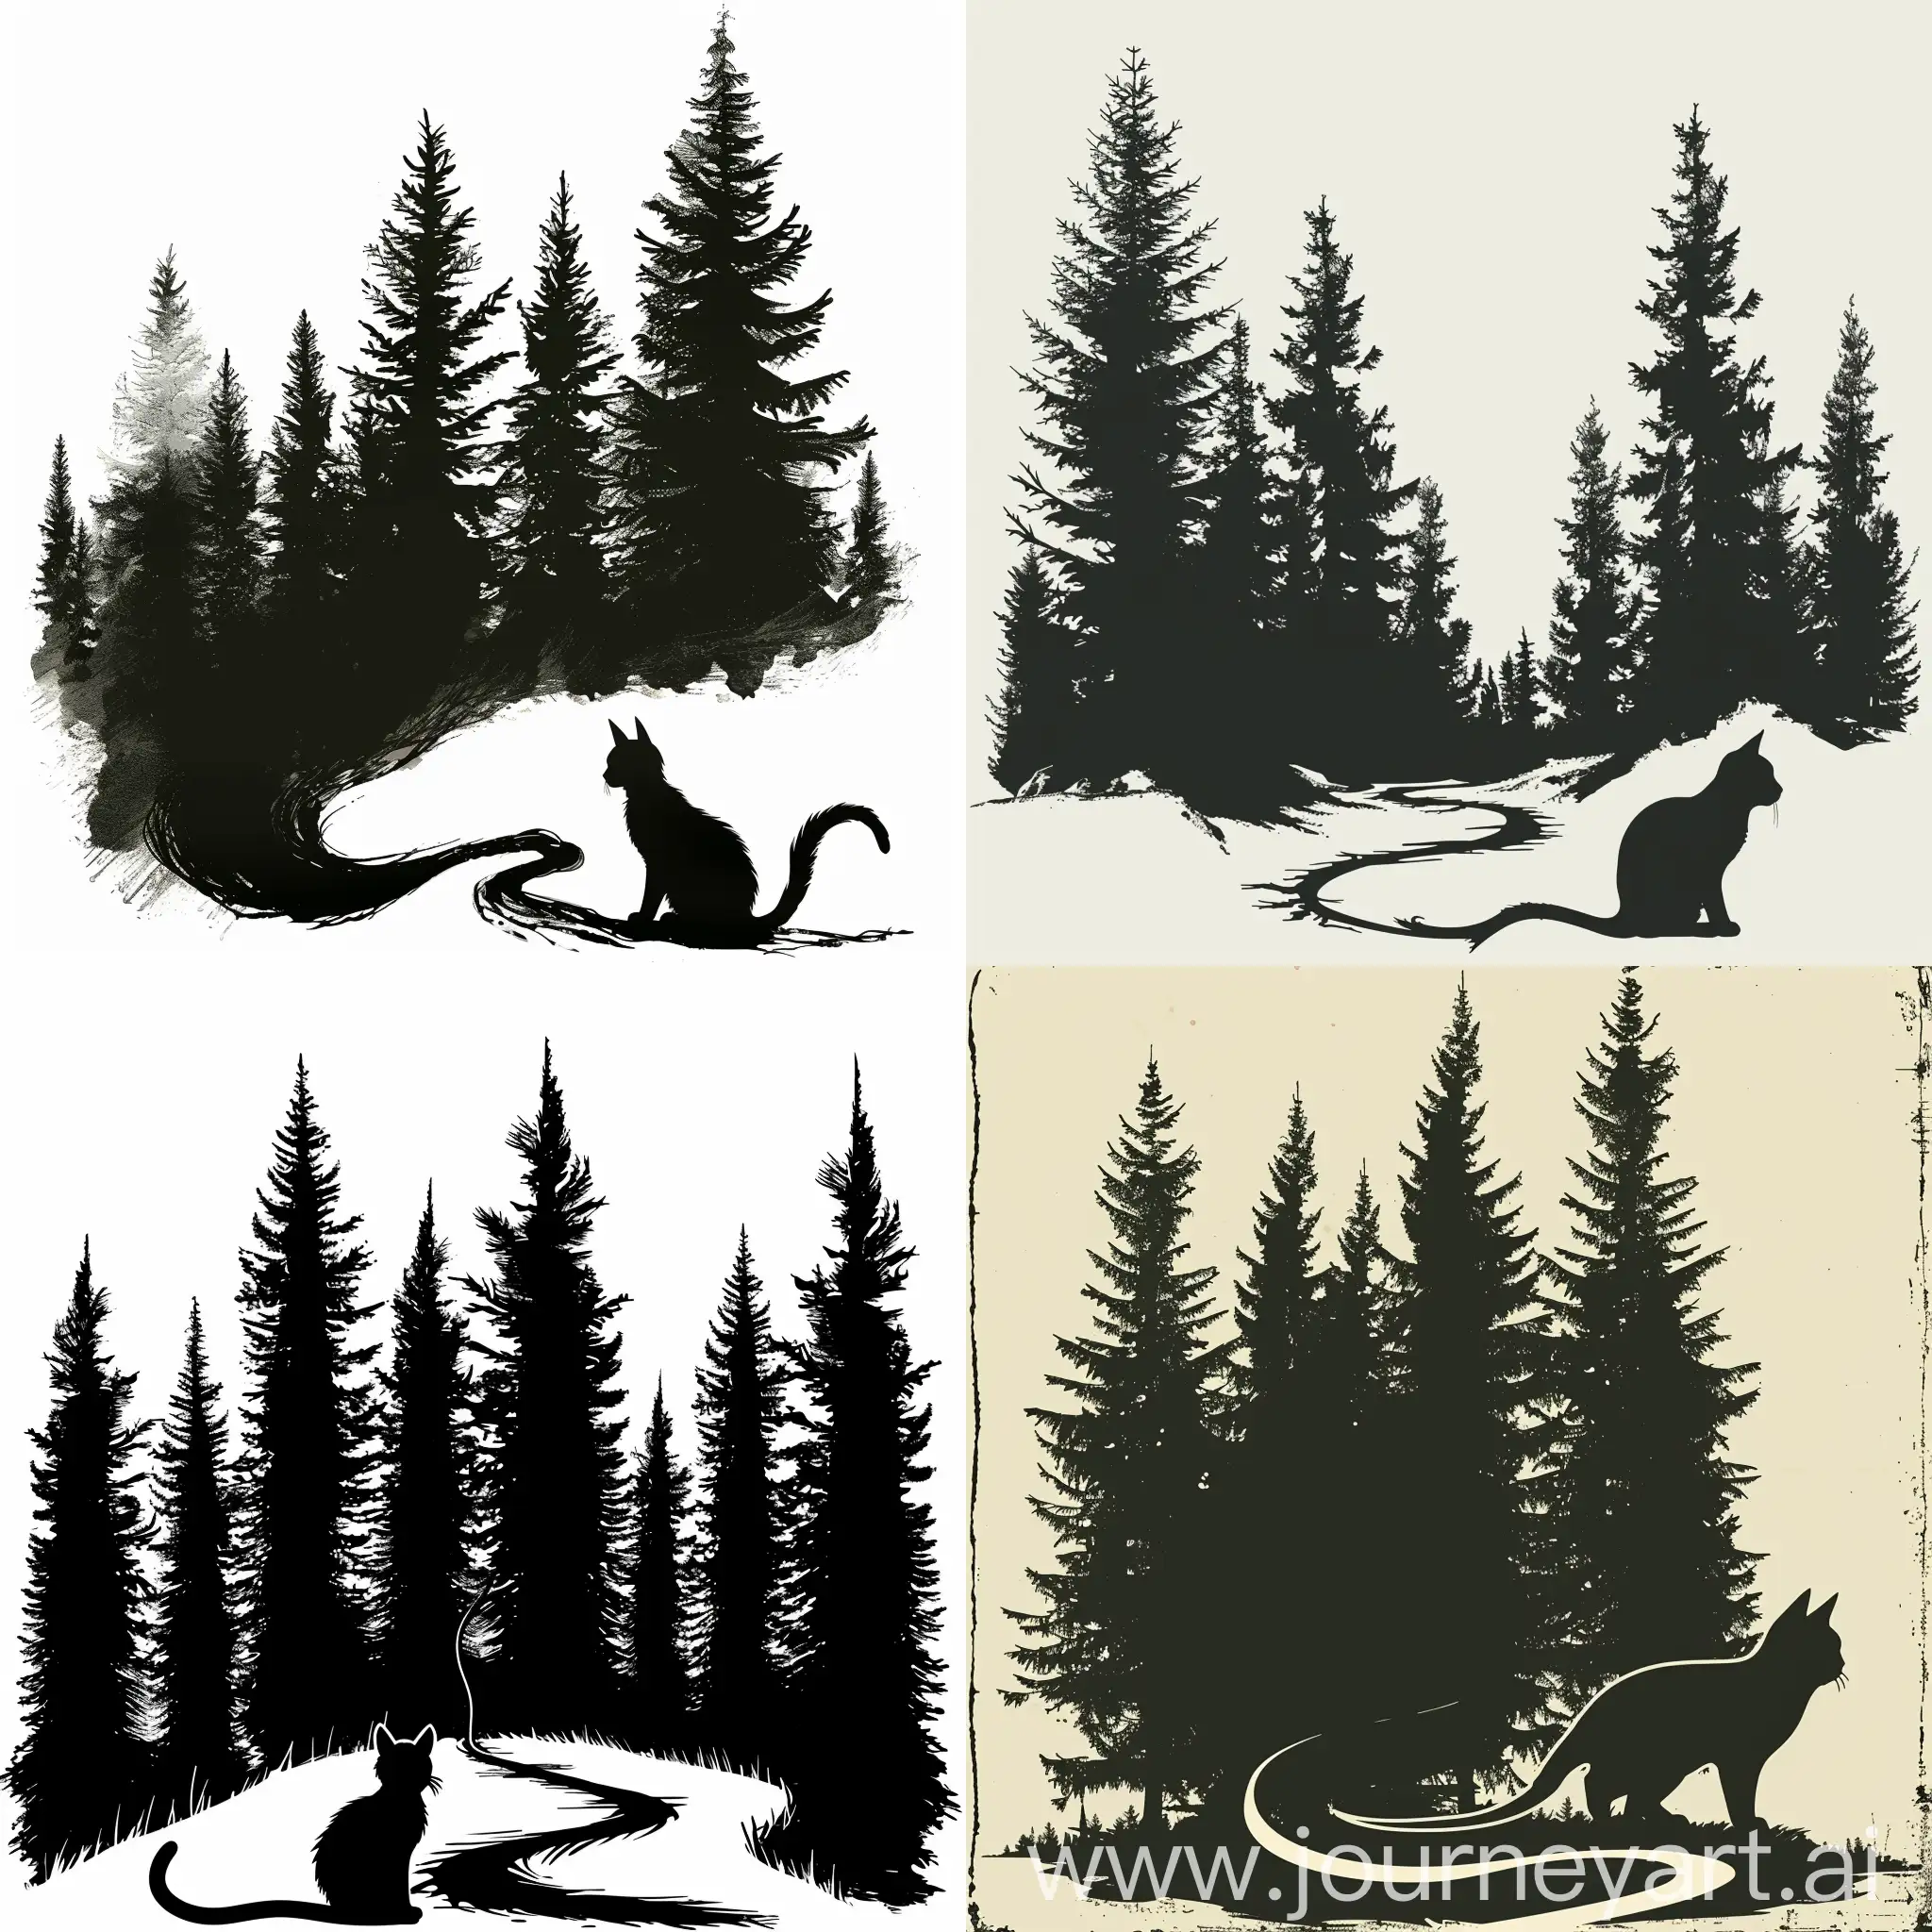 I would like to create a logo for a Cat Boarding kennel called Fur Creek Retreat.  I would like large fir tree silhouettes in background, with a cat in the foreground with the pointy ears sort of blending in with the trees.  The cat’s tail would morph into the shape of a winding creek